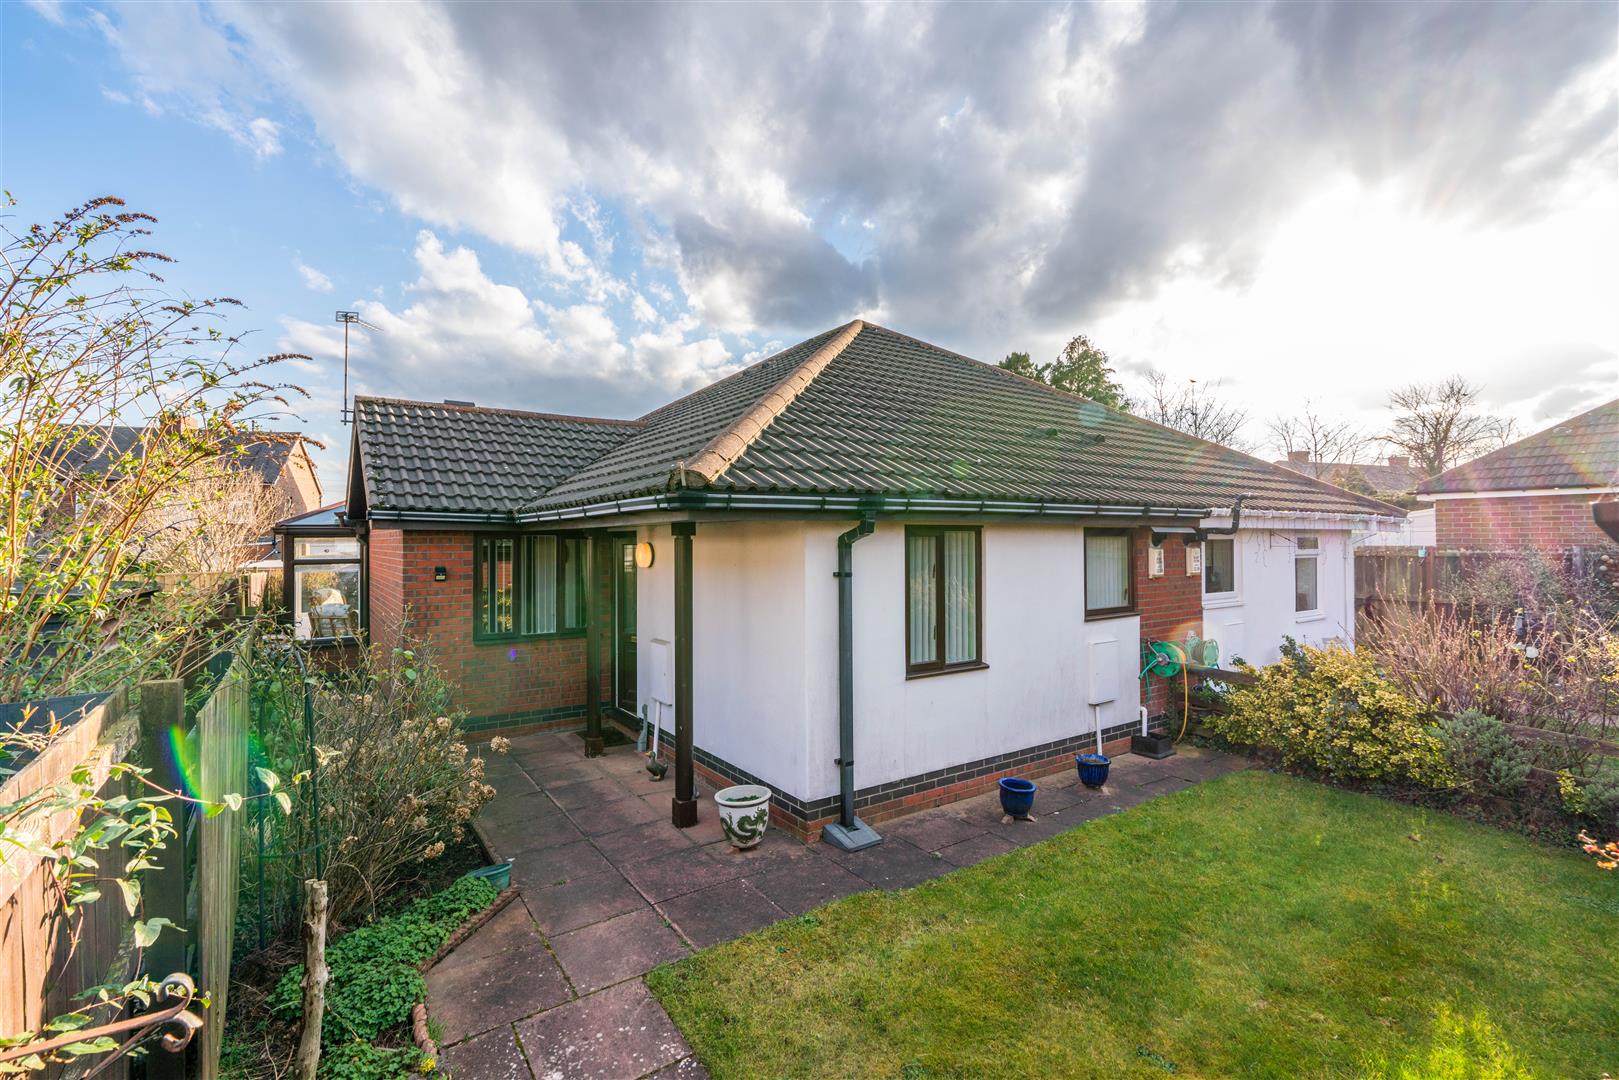 2 bed semi-detached bungalow for sale in Elmwood Mews, North Gosforth, NE13